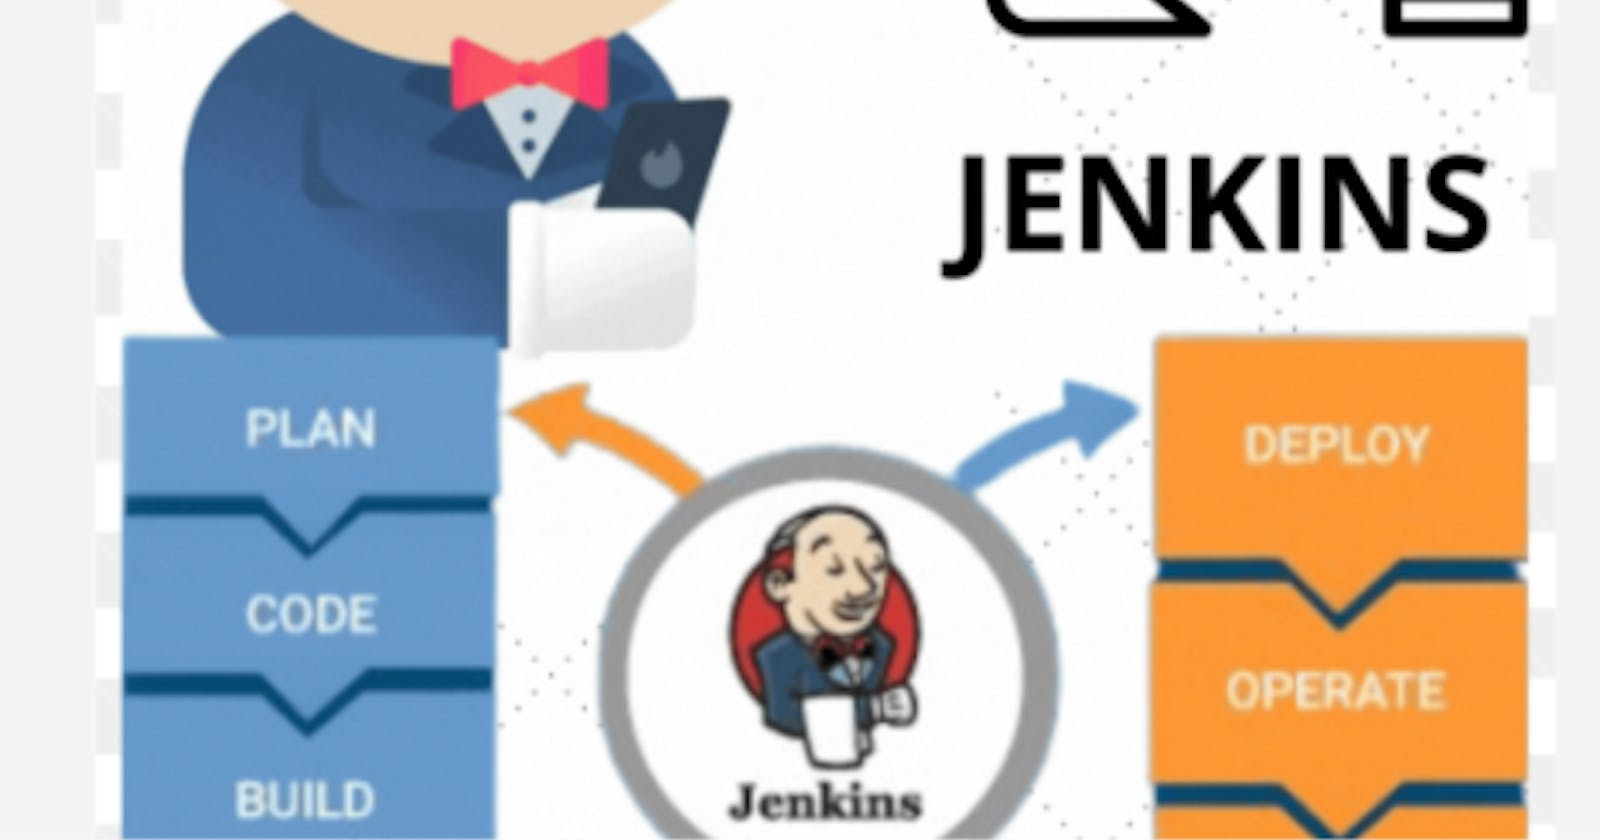 Title: “Mastering Jenkins: Exploring Job Configuration Options and Build Automation Techniques in Jenkins"